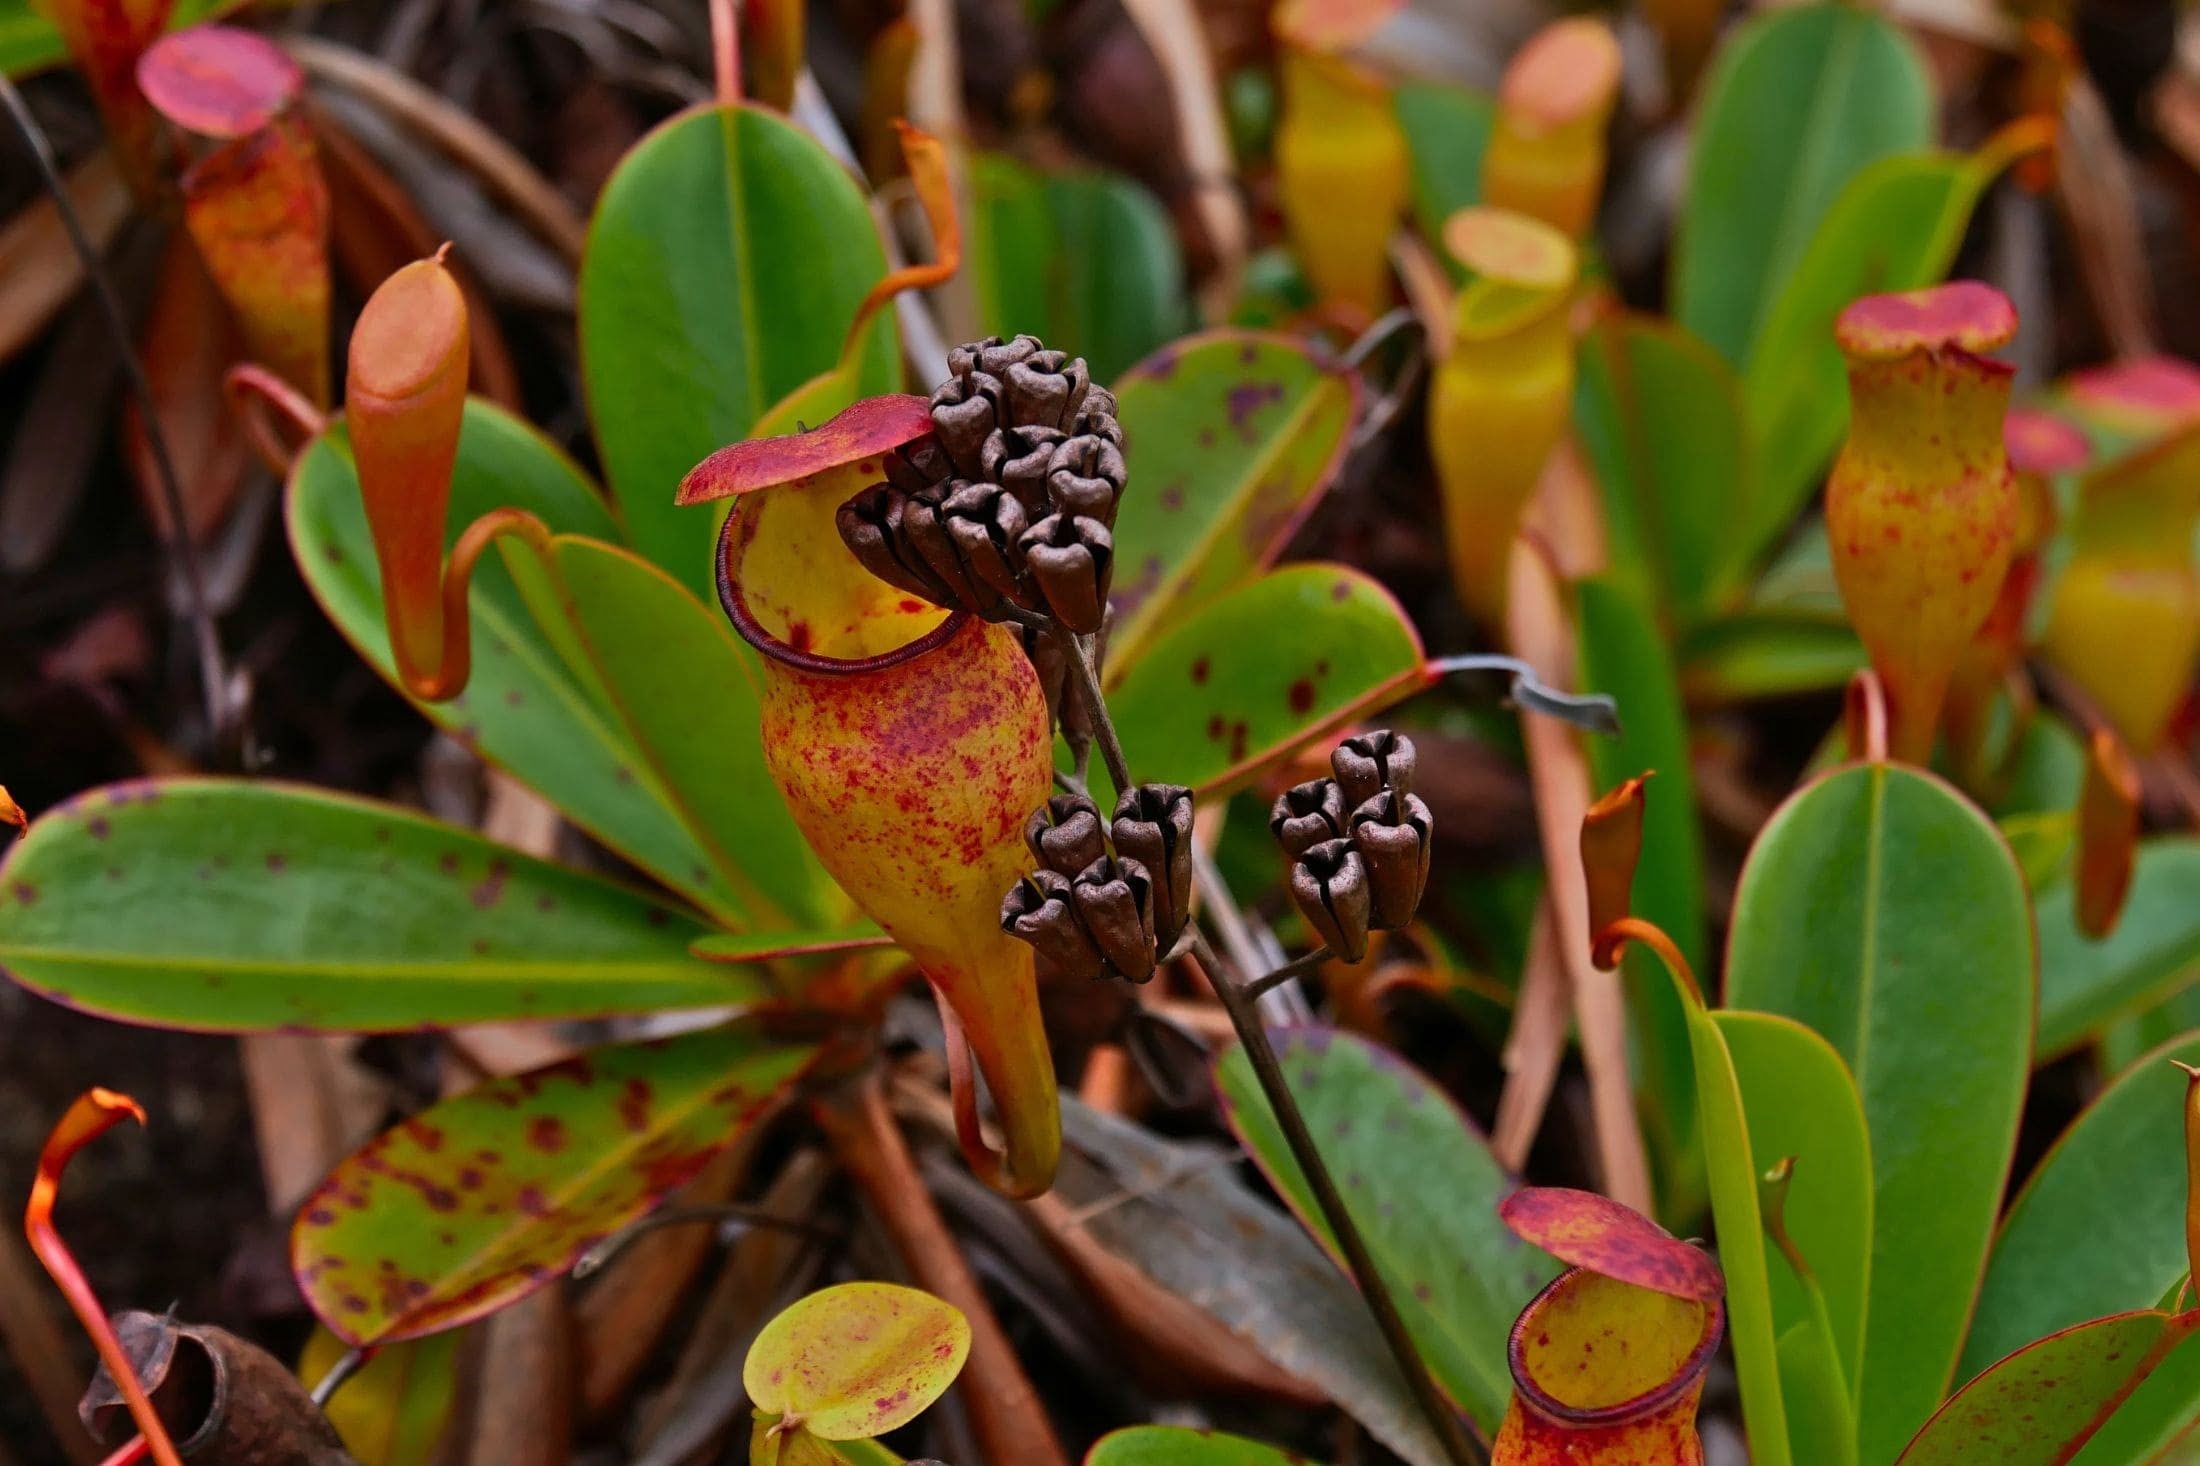 Pitcher plant eating a flower.